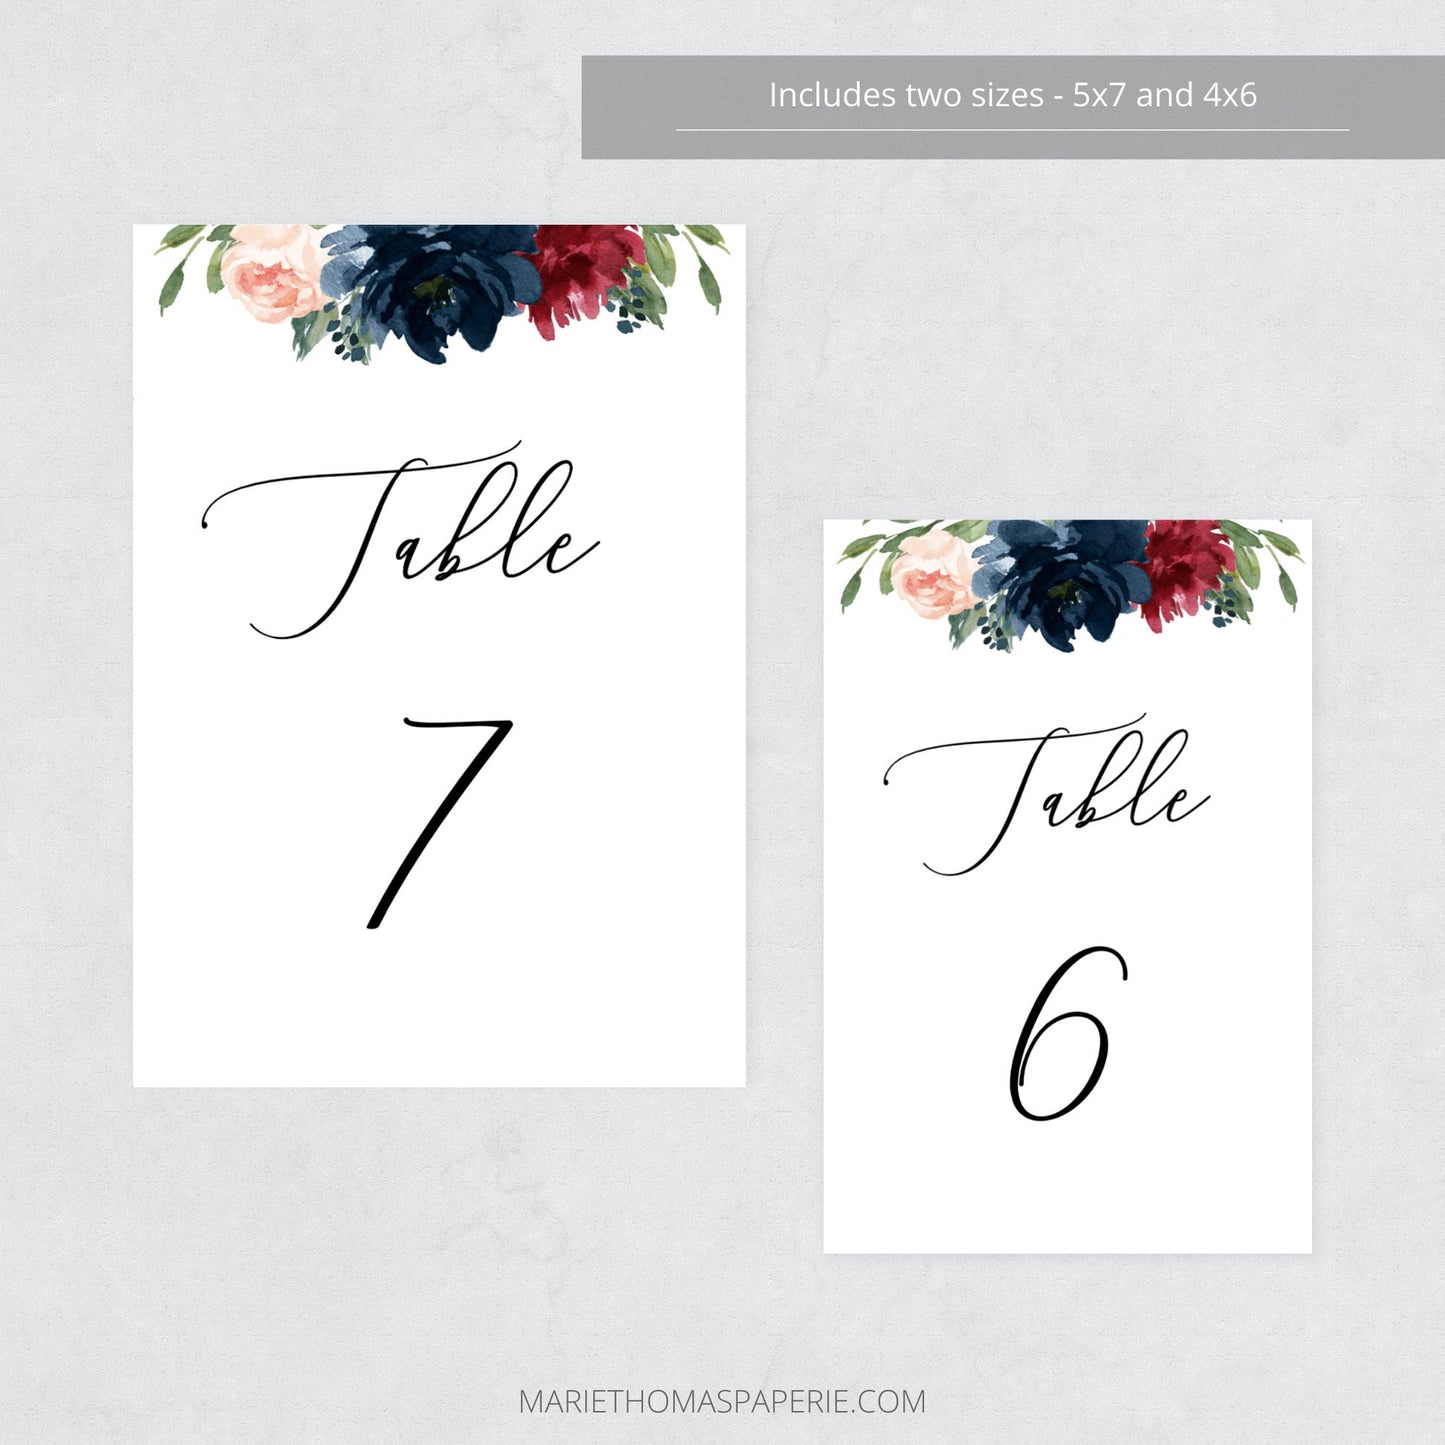 Editable Wedding Table Number Burgundy & Navy Floral Table Number Card 5x7 and 4x6 Template